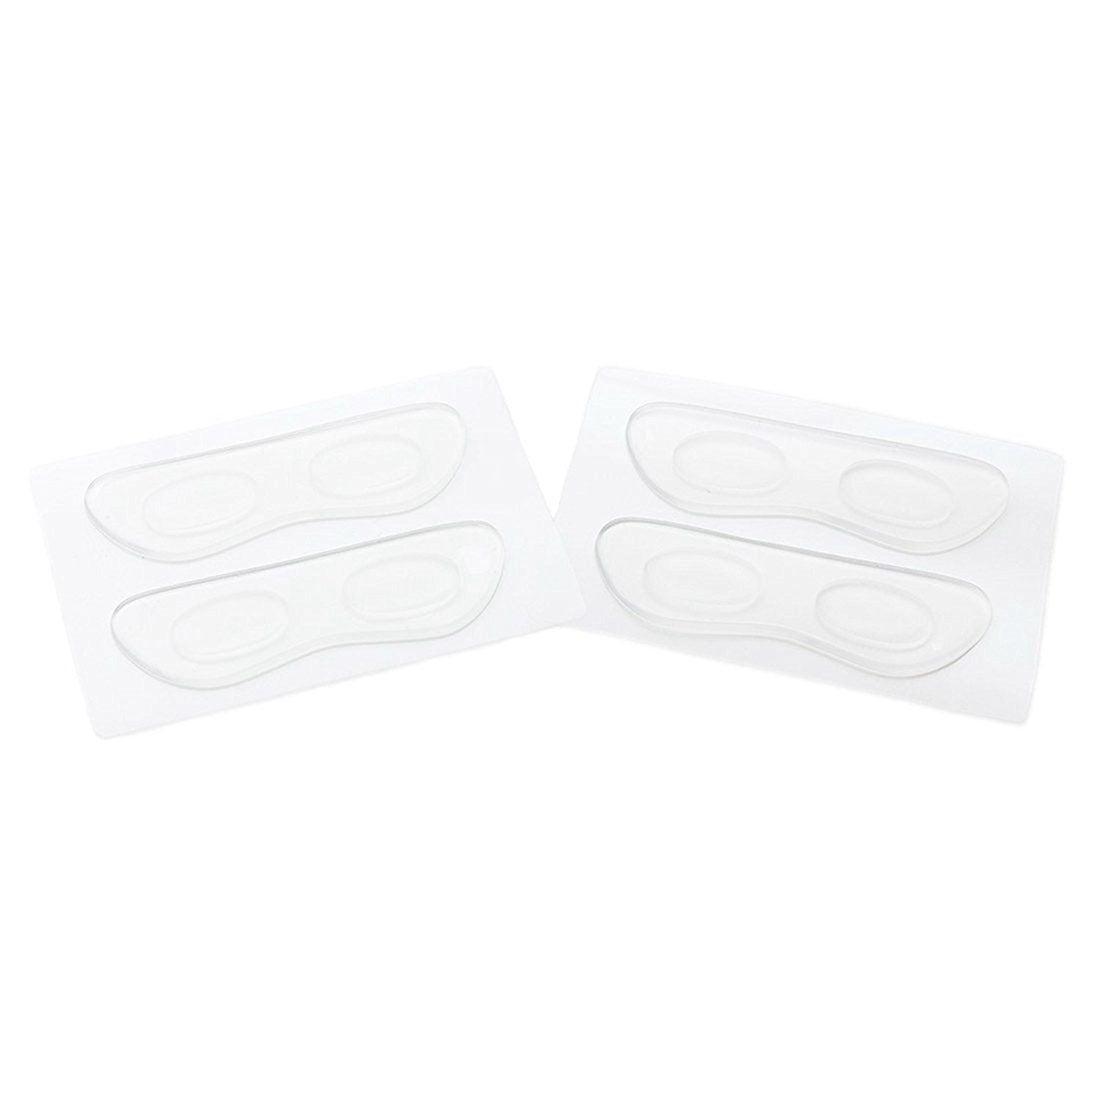 2 Pairs Massage Heel Liner Silica gel Pads to Prevent New Shoes Blisters, Transparent - ebowsos